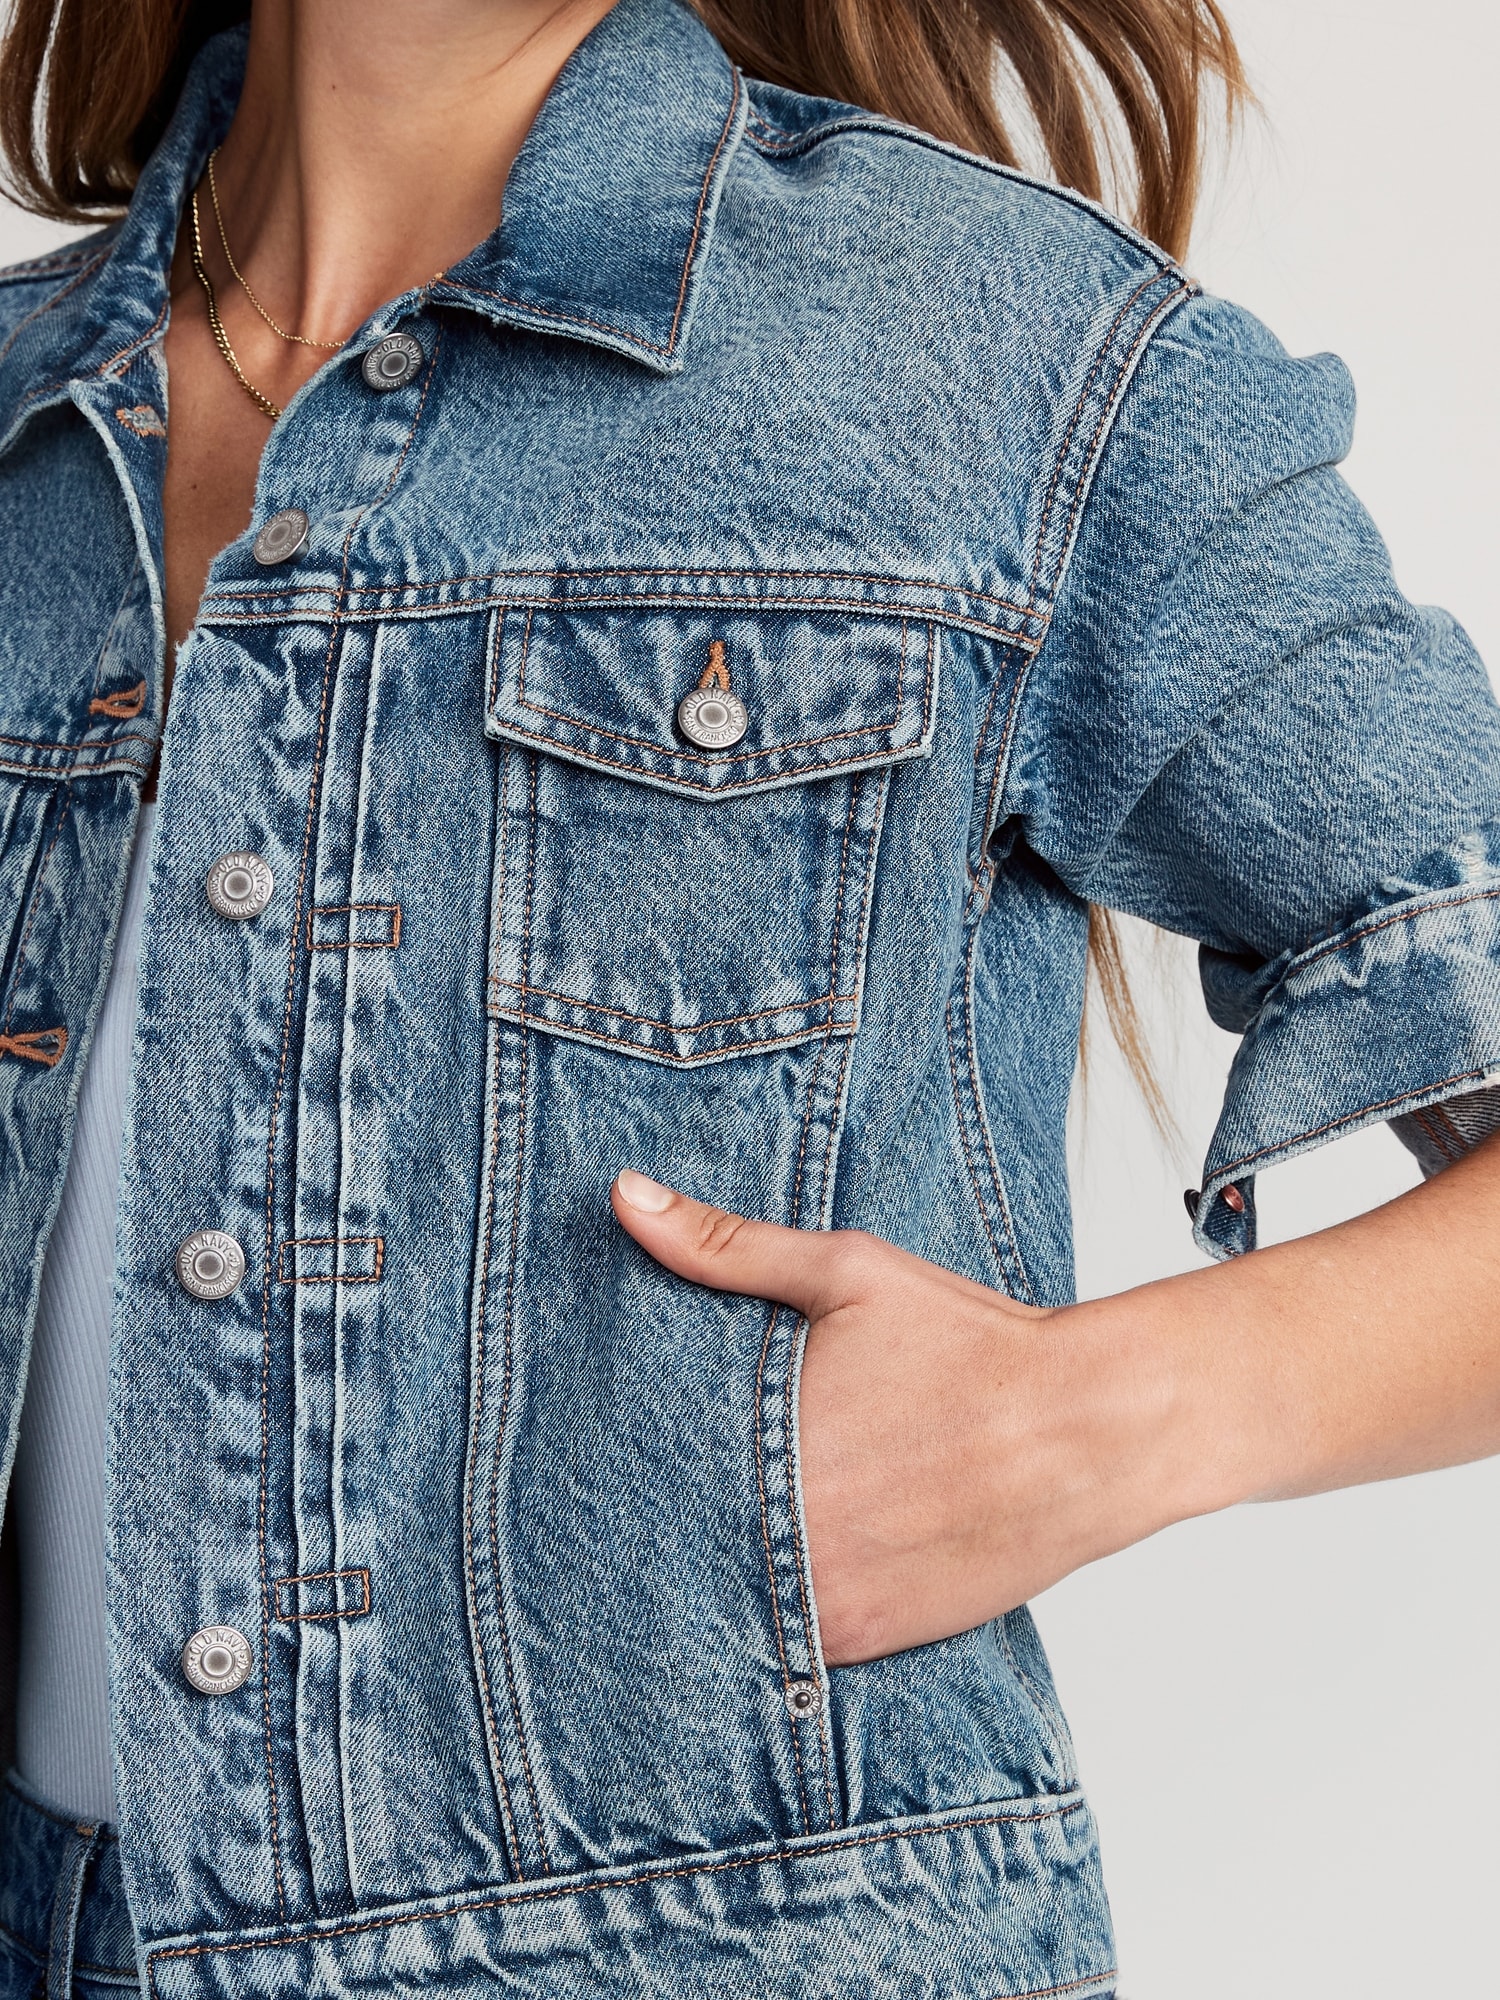 Validering Let at læse besked Classic Jean Jacket for Women | Old Navy